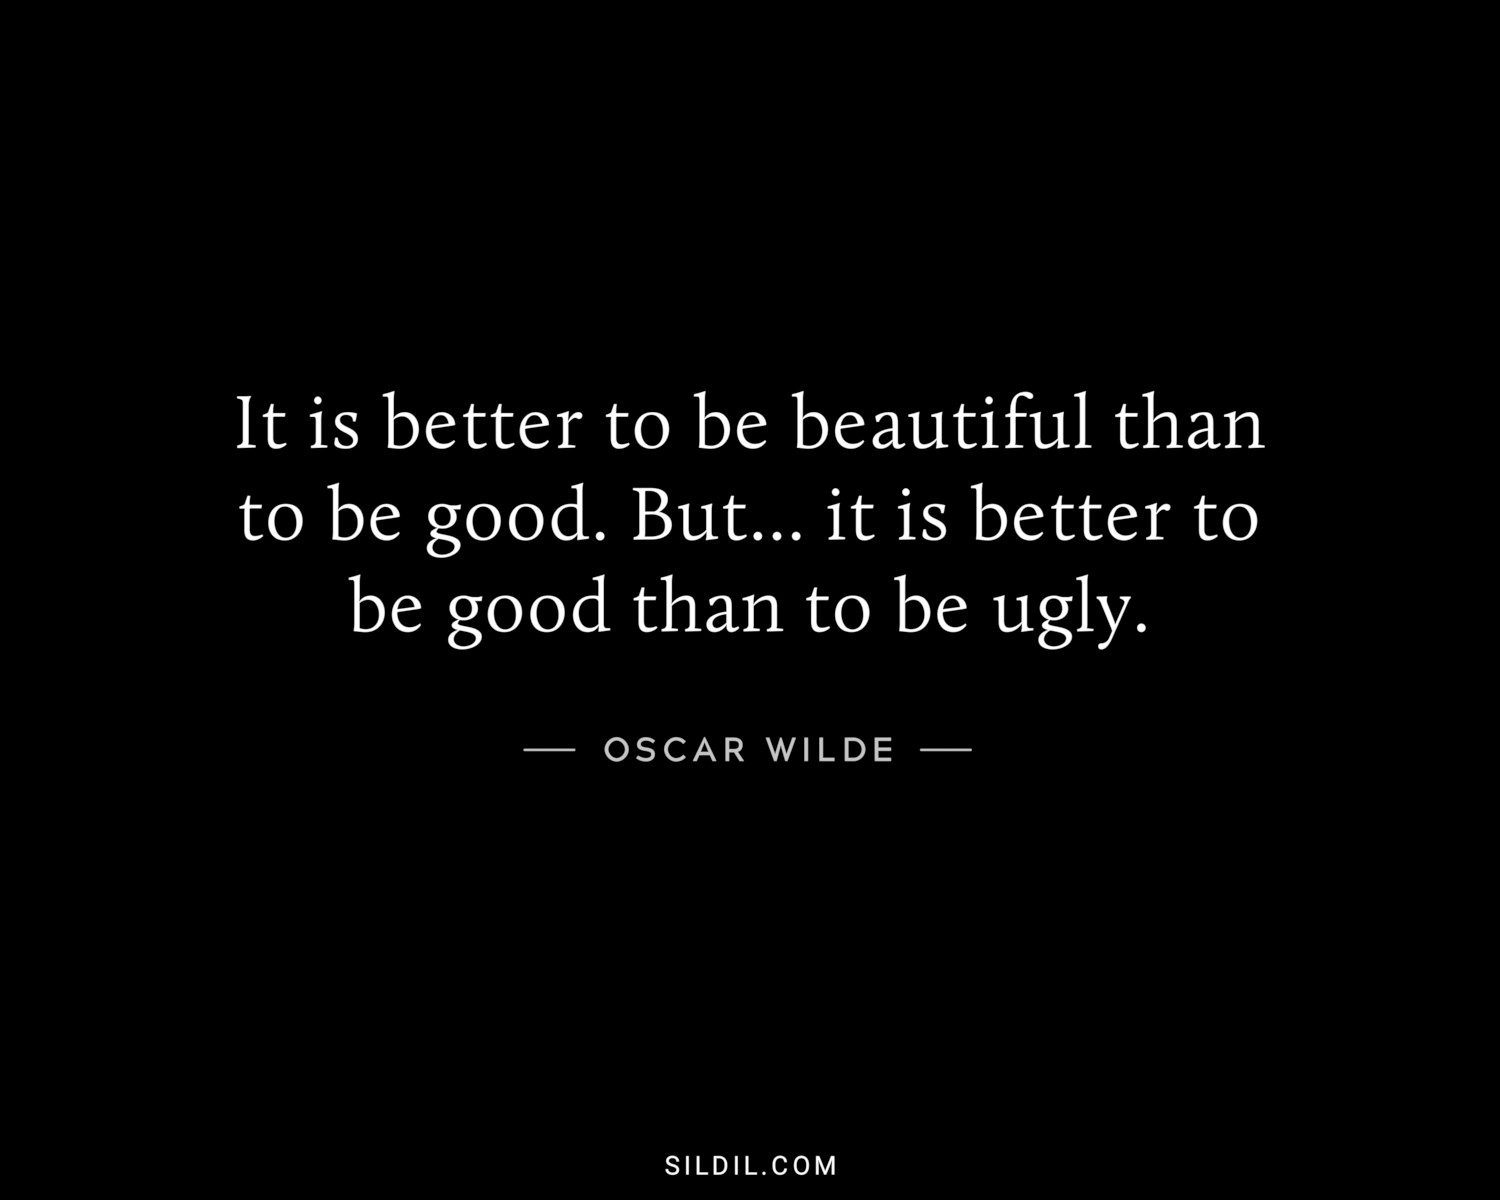 It is better to be beautiful than to be good. But... it is better to be good than to be ugly.